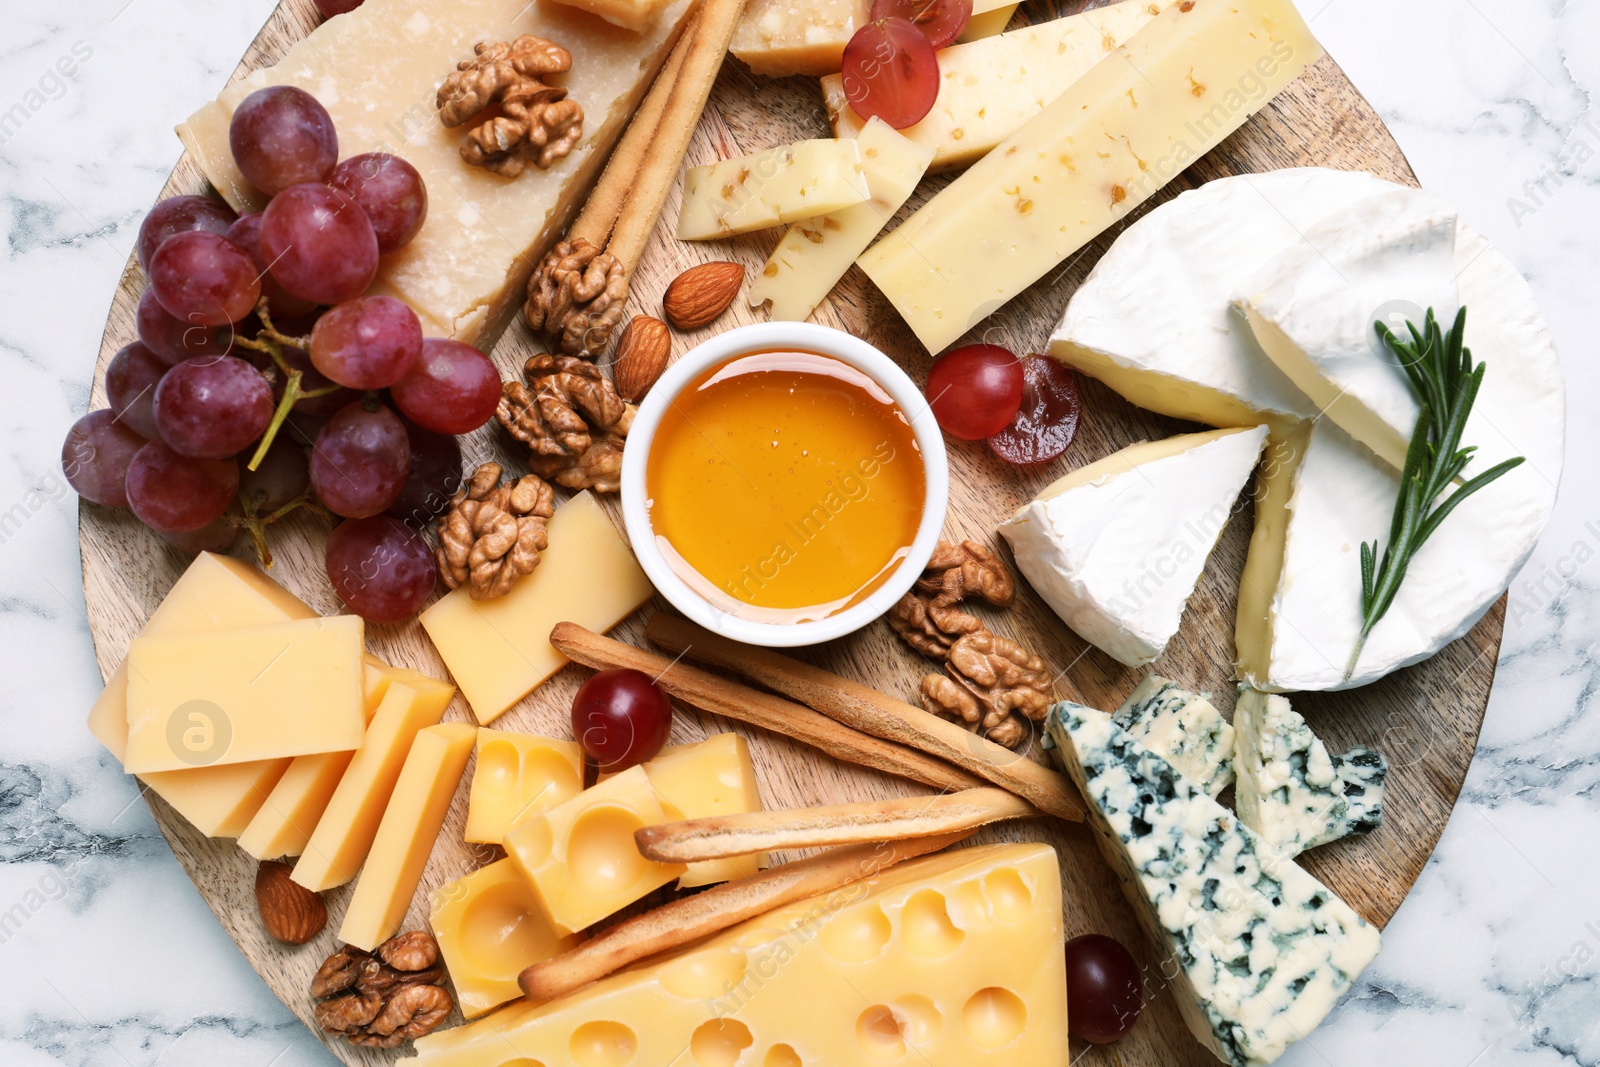 Photo of Cheese plate with honey, grapes and nuts on white marble table, top view